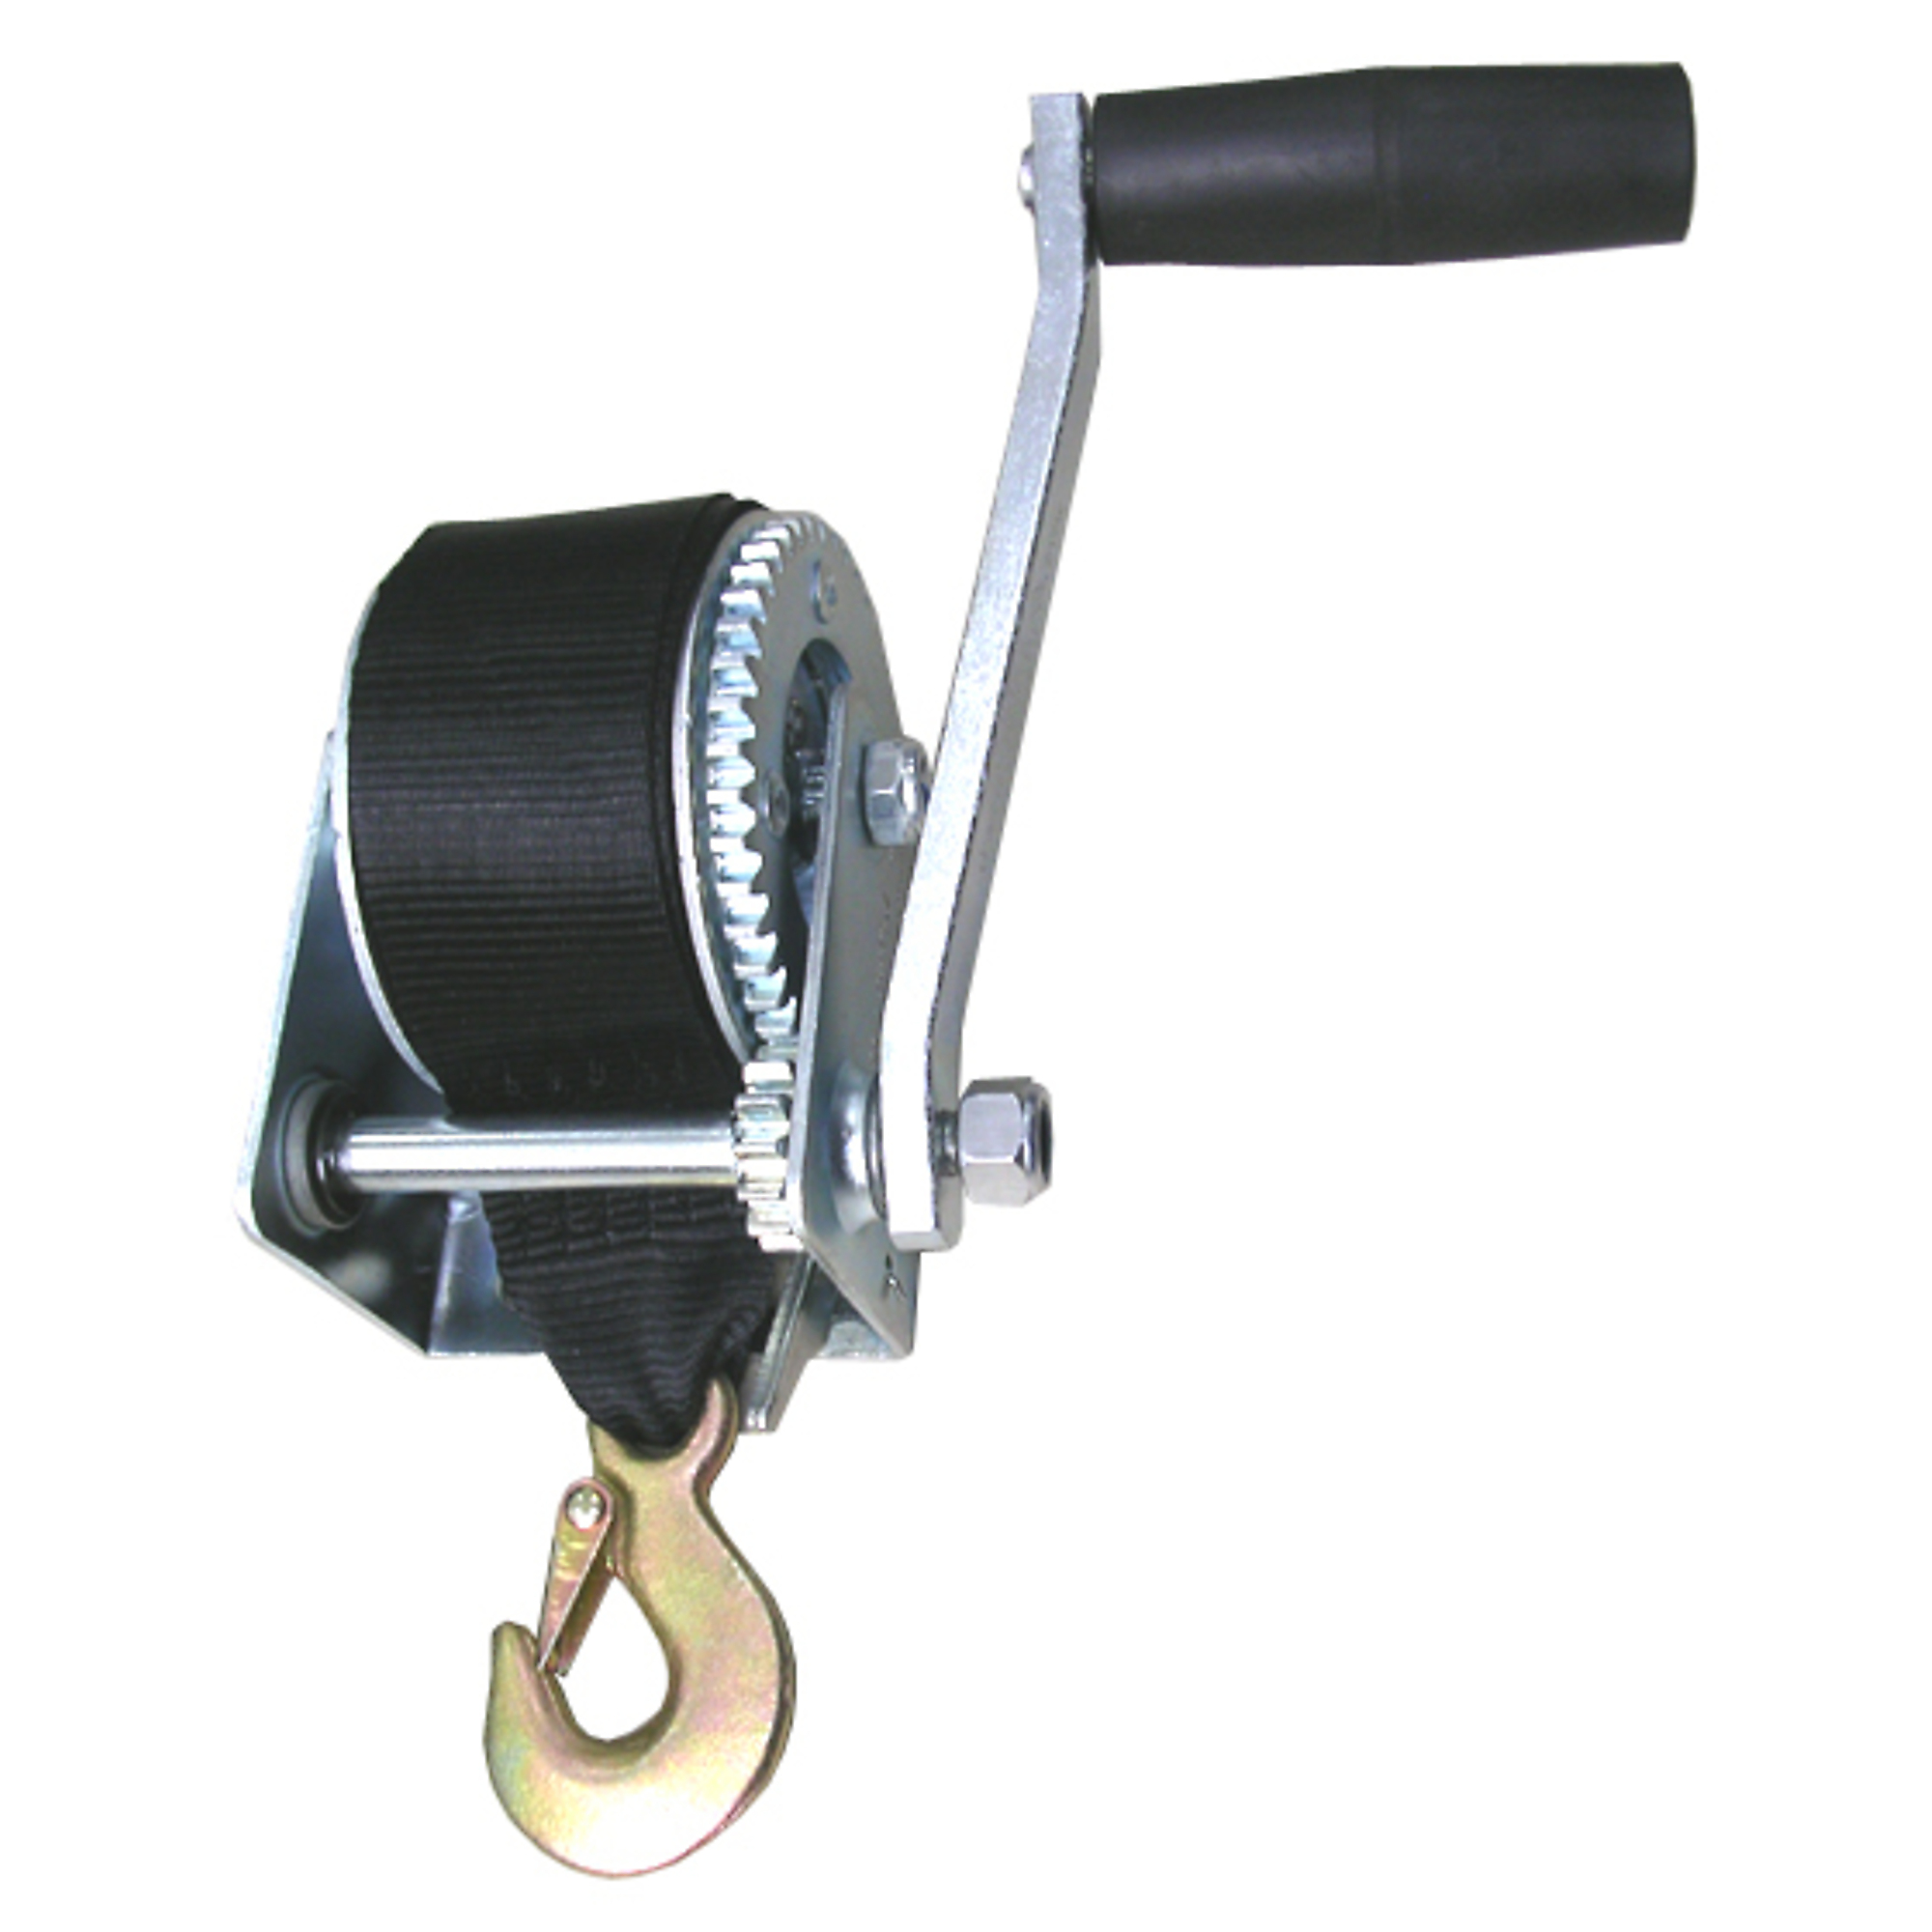 American Power Pull, 1100 lbs Hand Winch, Model AG229